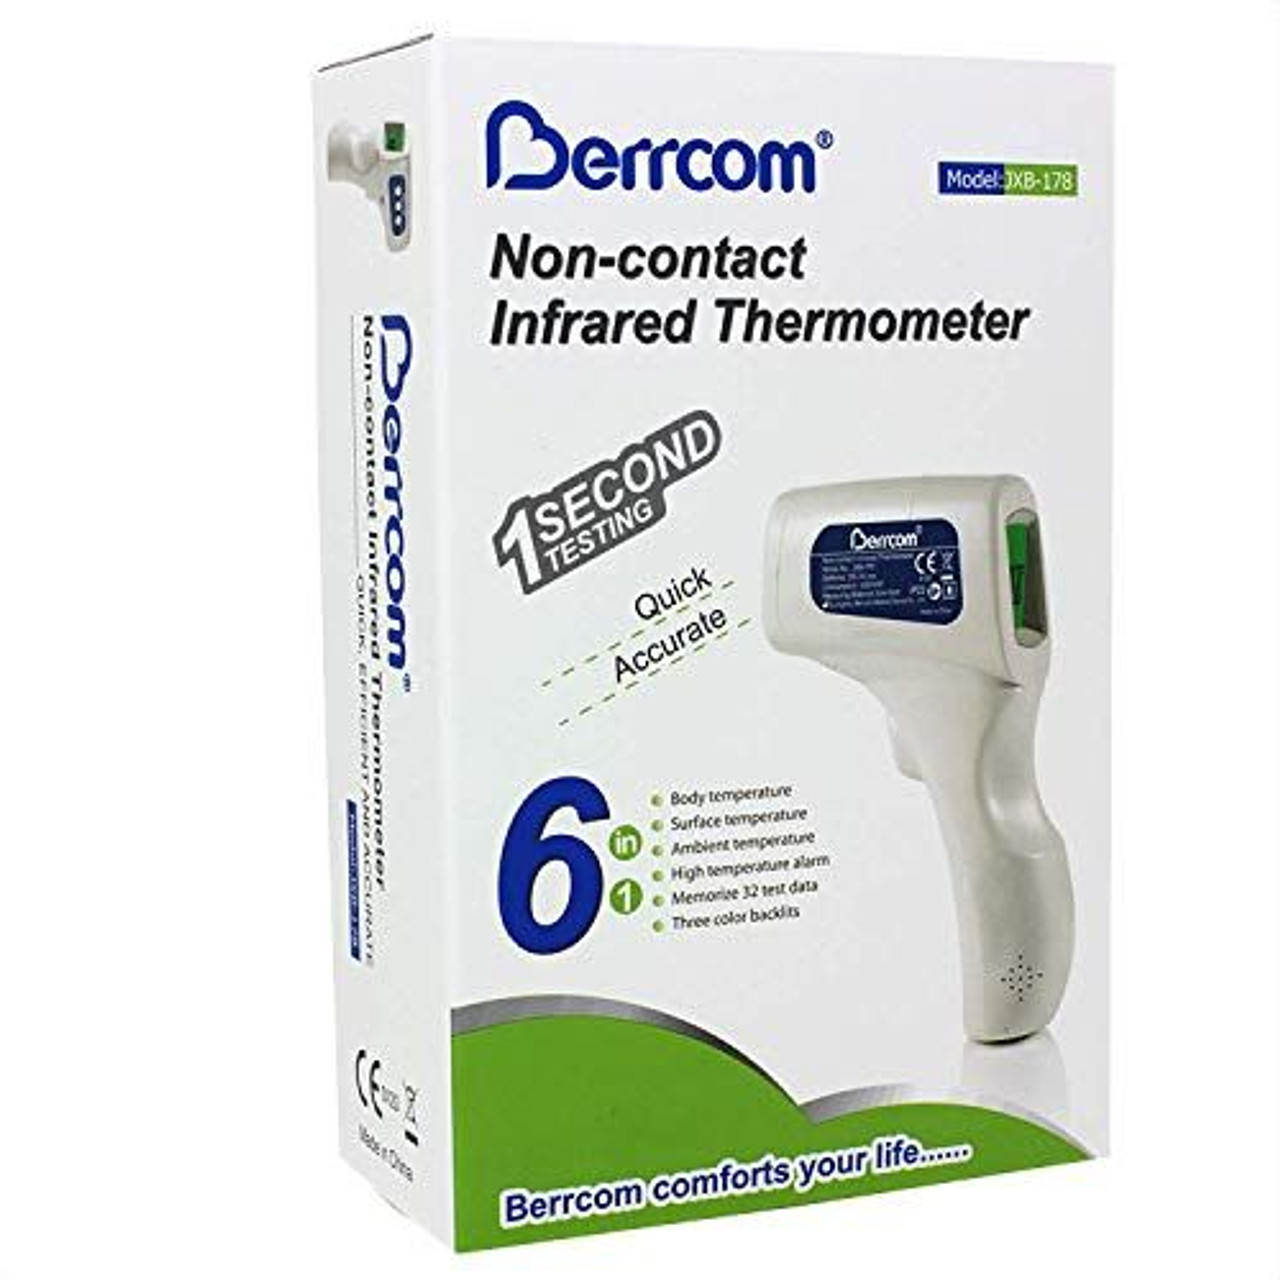 Infrared Digital Thermometers, Baby Digital Thermometers